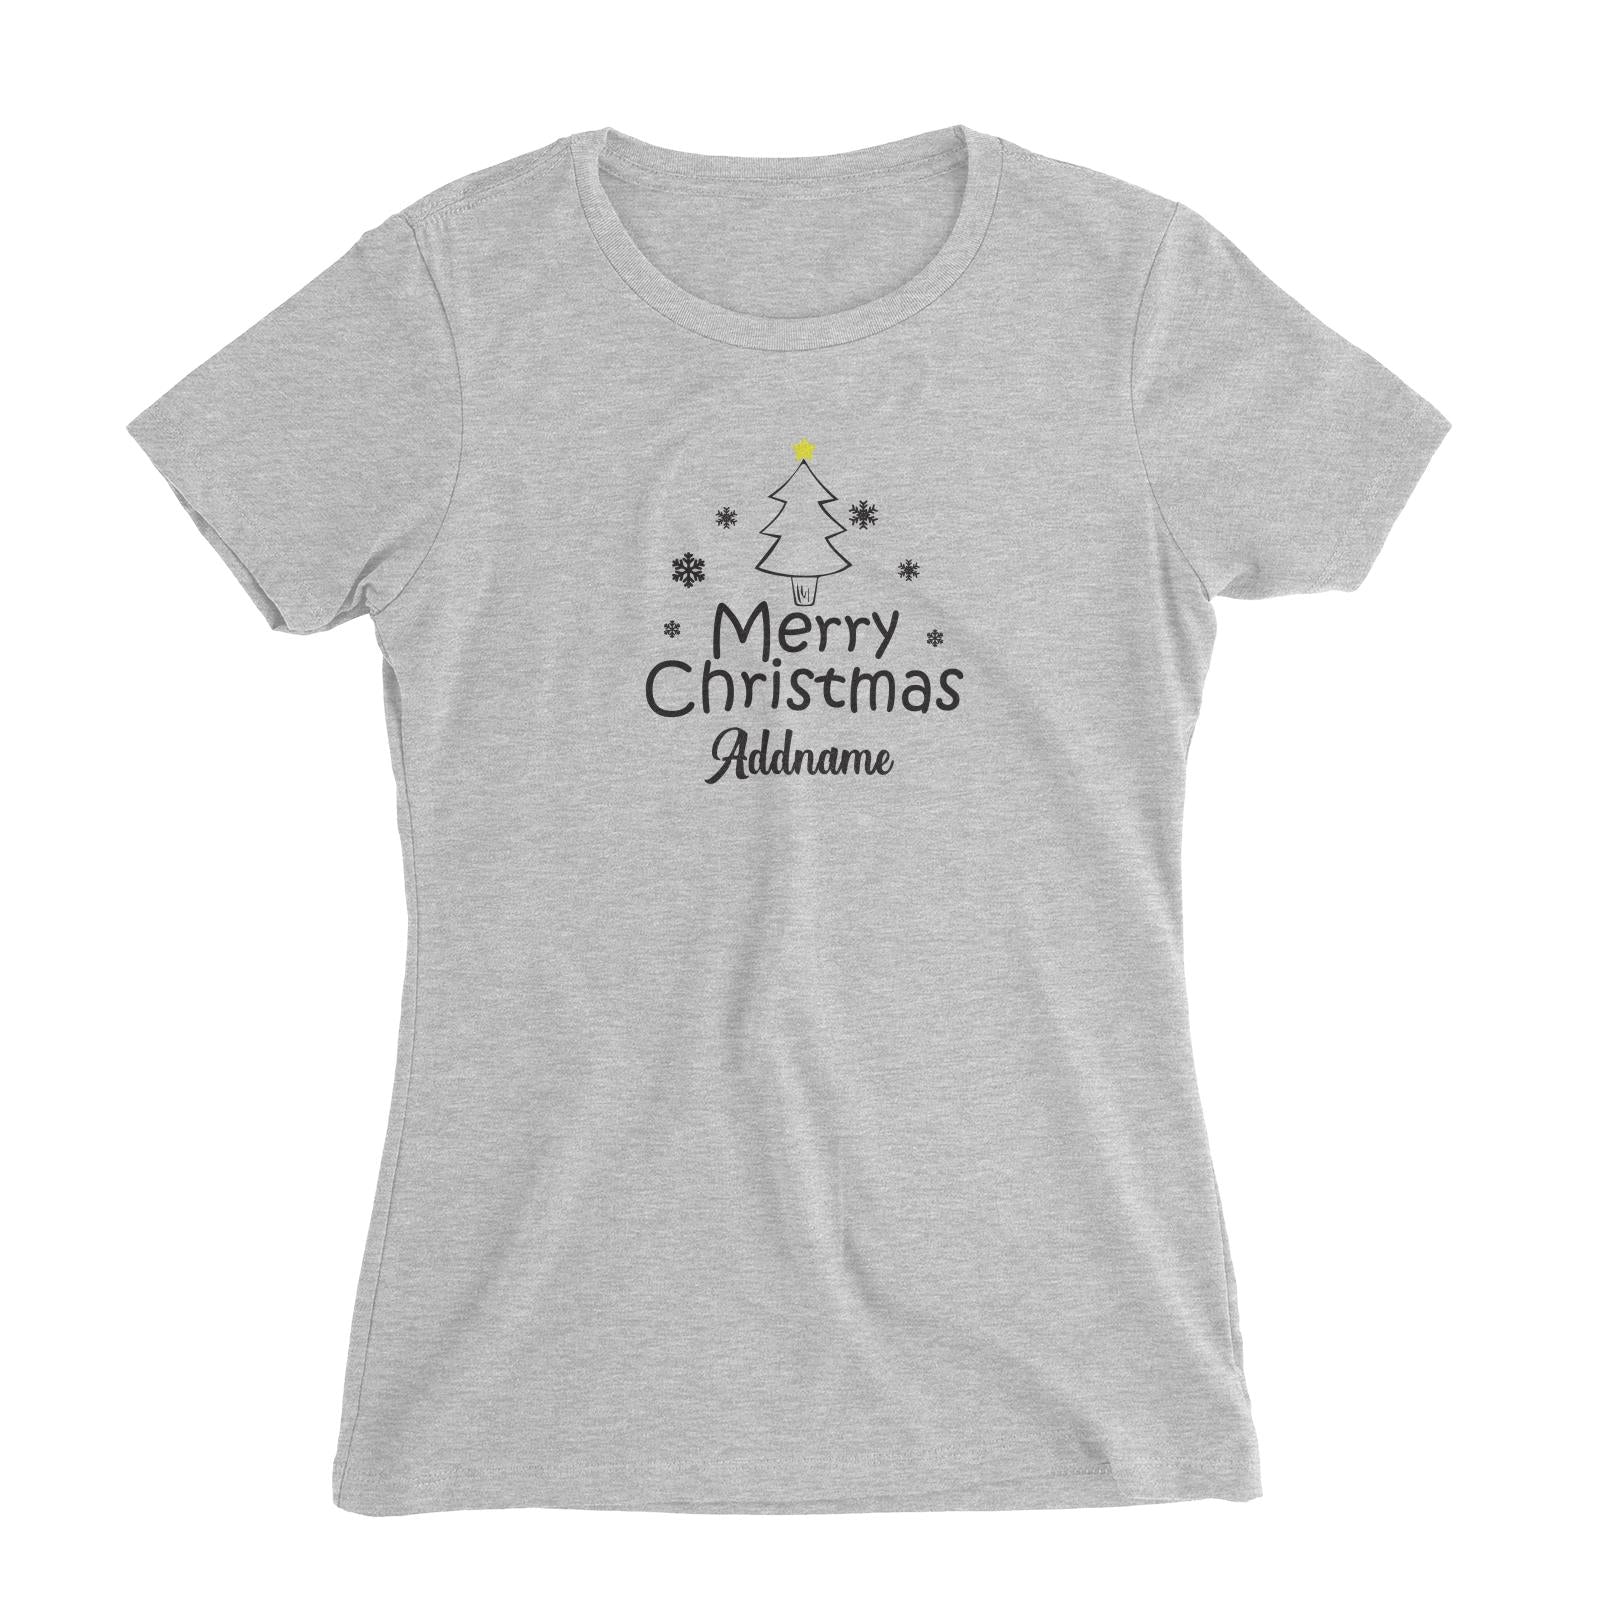 Christmas Series Merry Christmas Tree with Snowflakes Women's Slim Fit T-Shirt